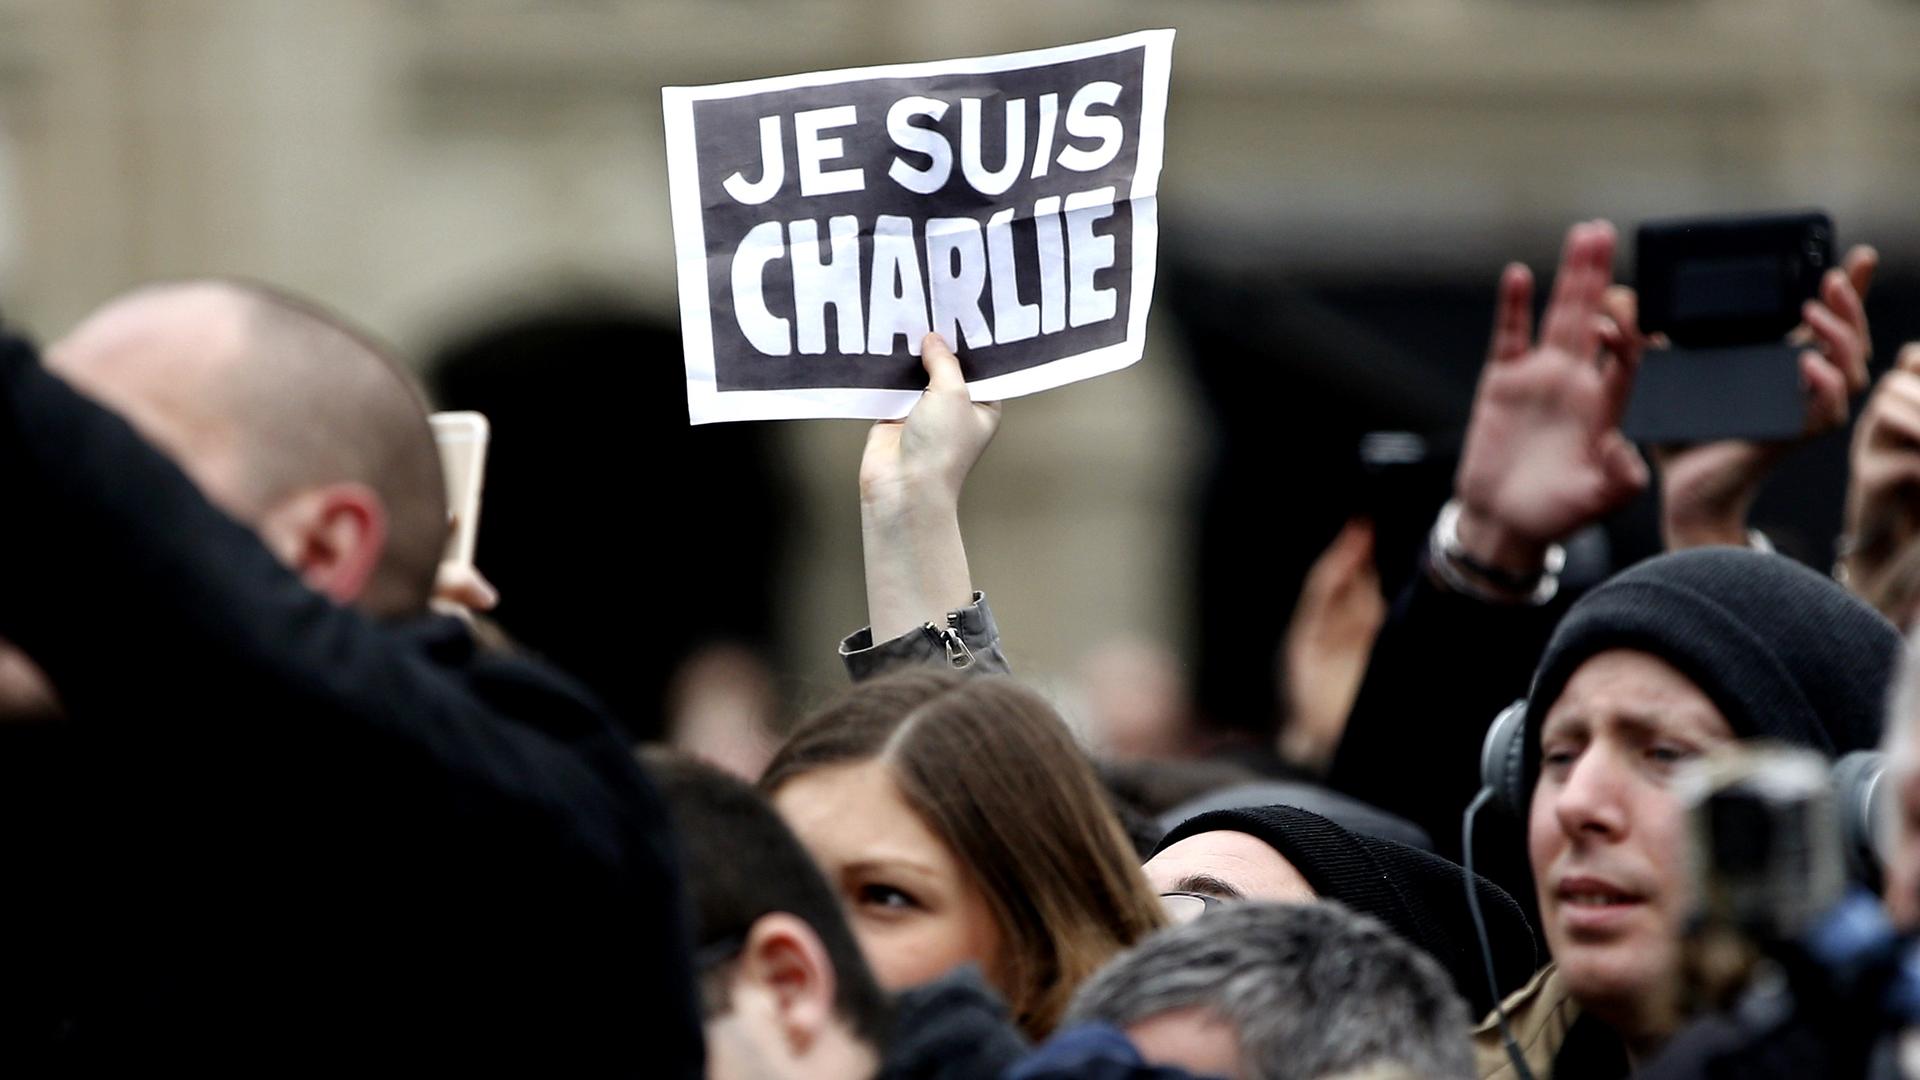 A person holds up a "Je Suis Charlie" ("I am Charlie") sign during a ceremony at Place de la Republique square to pay tribute to the victims of the 2015 shooting at the French satirical newspaper Charlie Hebdo, in Paris, France, Jan. 10, 2016. 